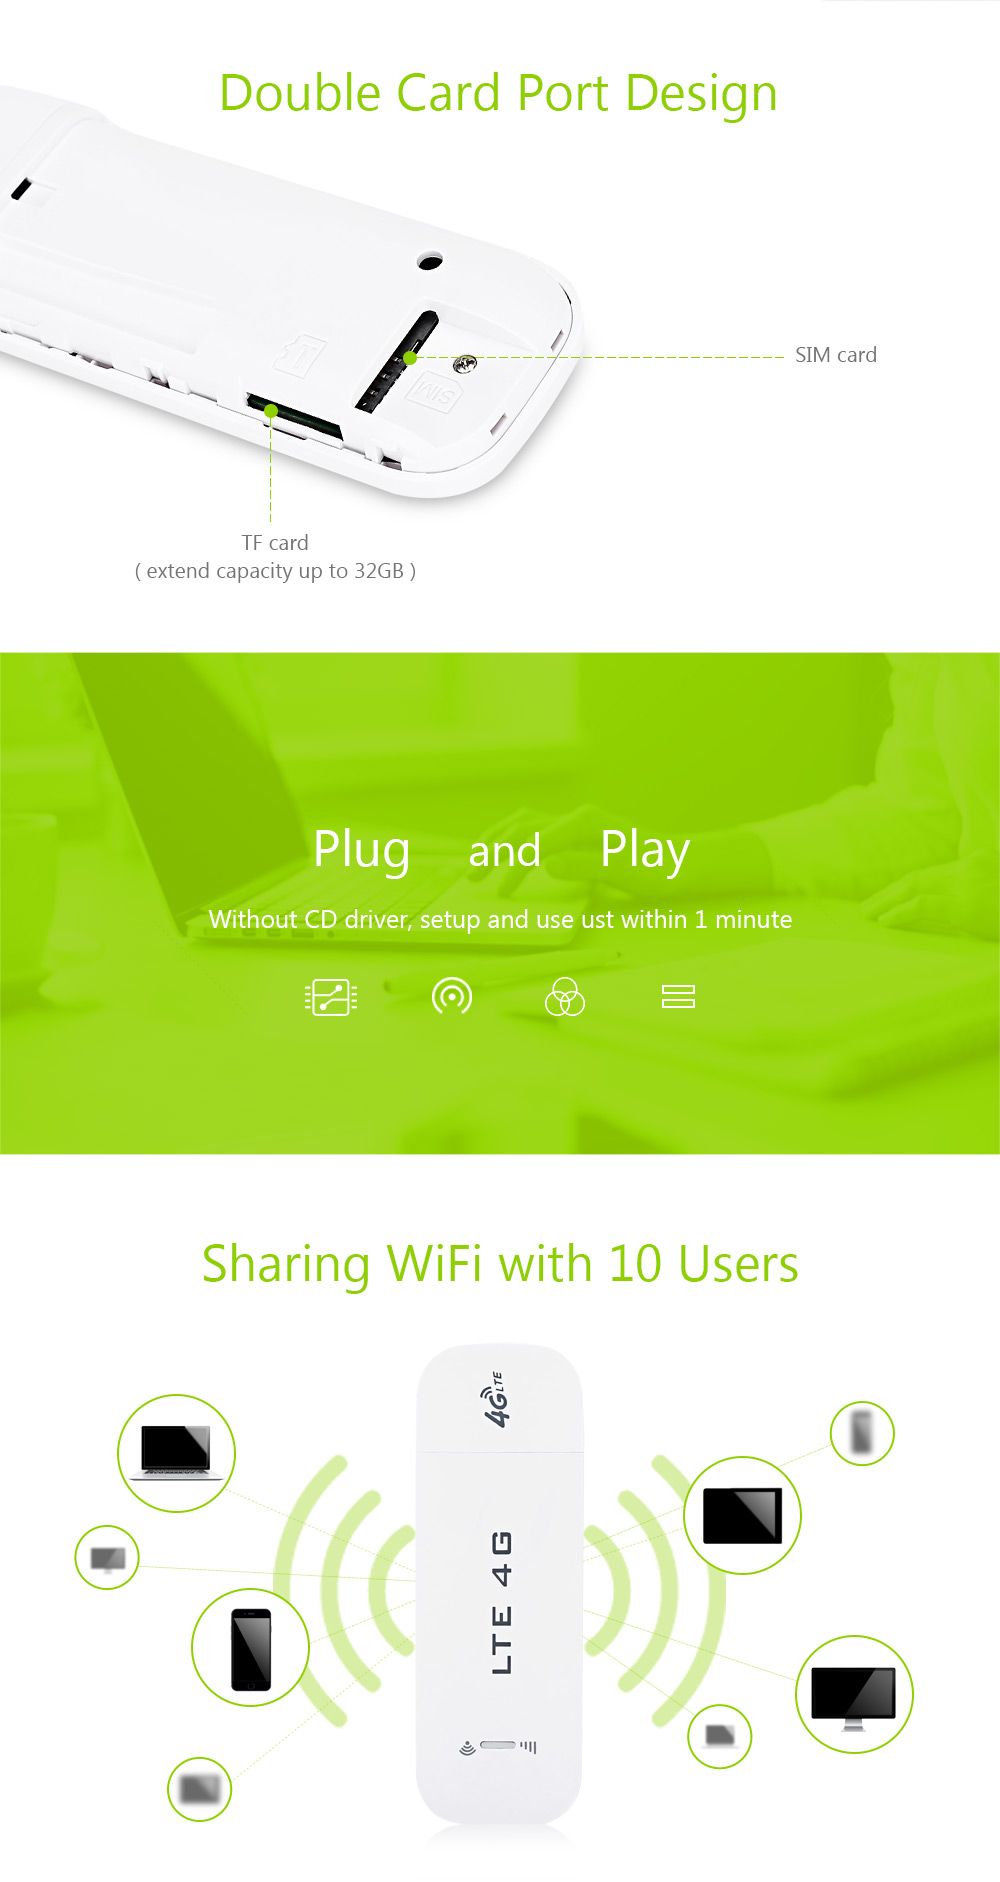 3G4G-Wifi-Wireless-Router-LTE-100M-SIM-Card-USB-Modem-Dongle-White-Fast-Speed-WiFi-Connection--Devic-1510908